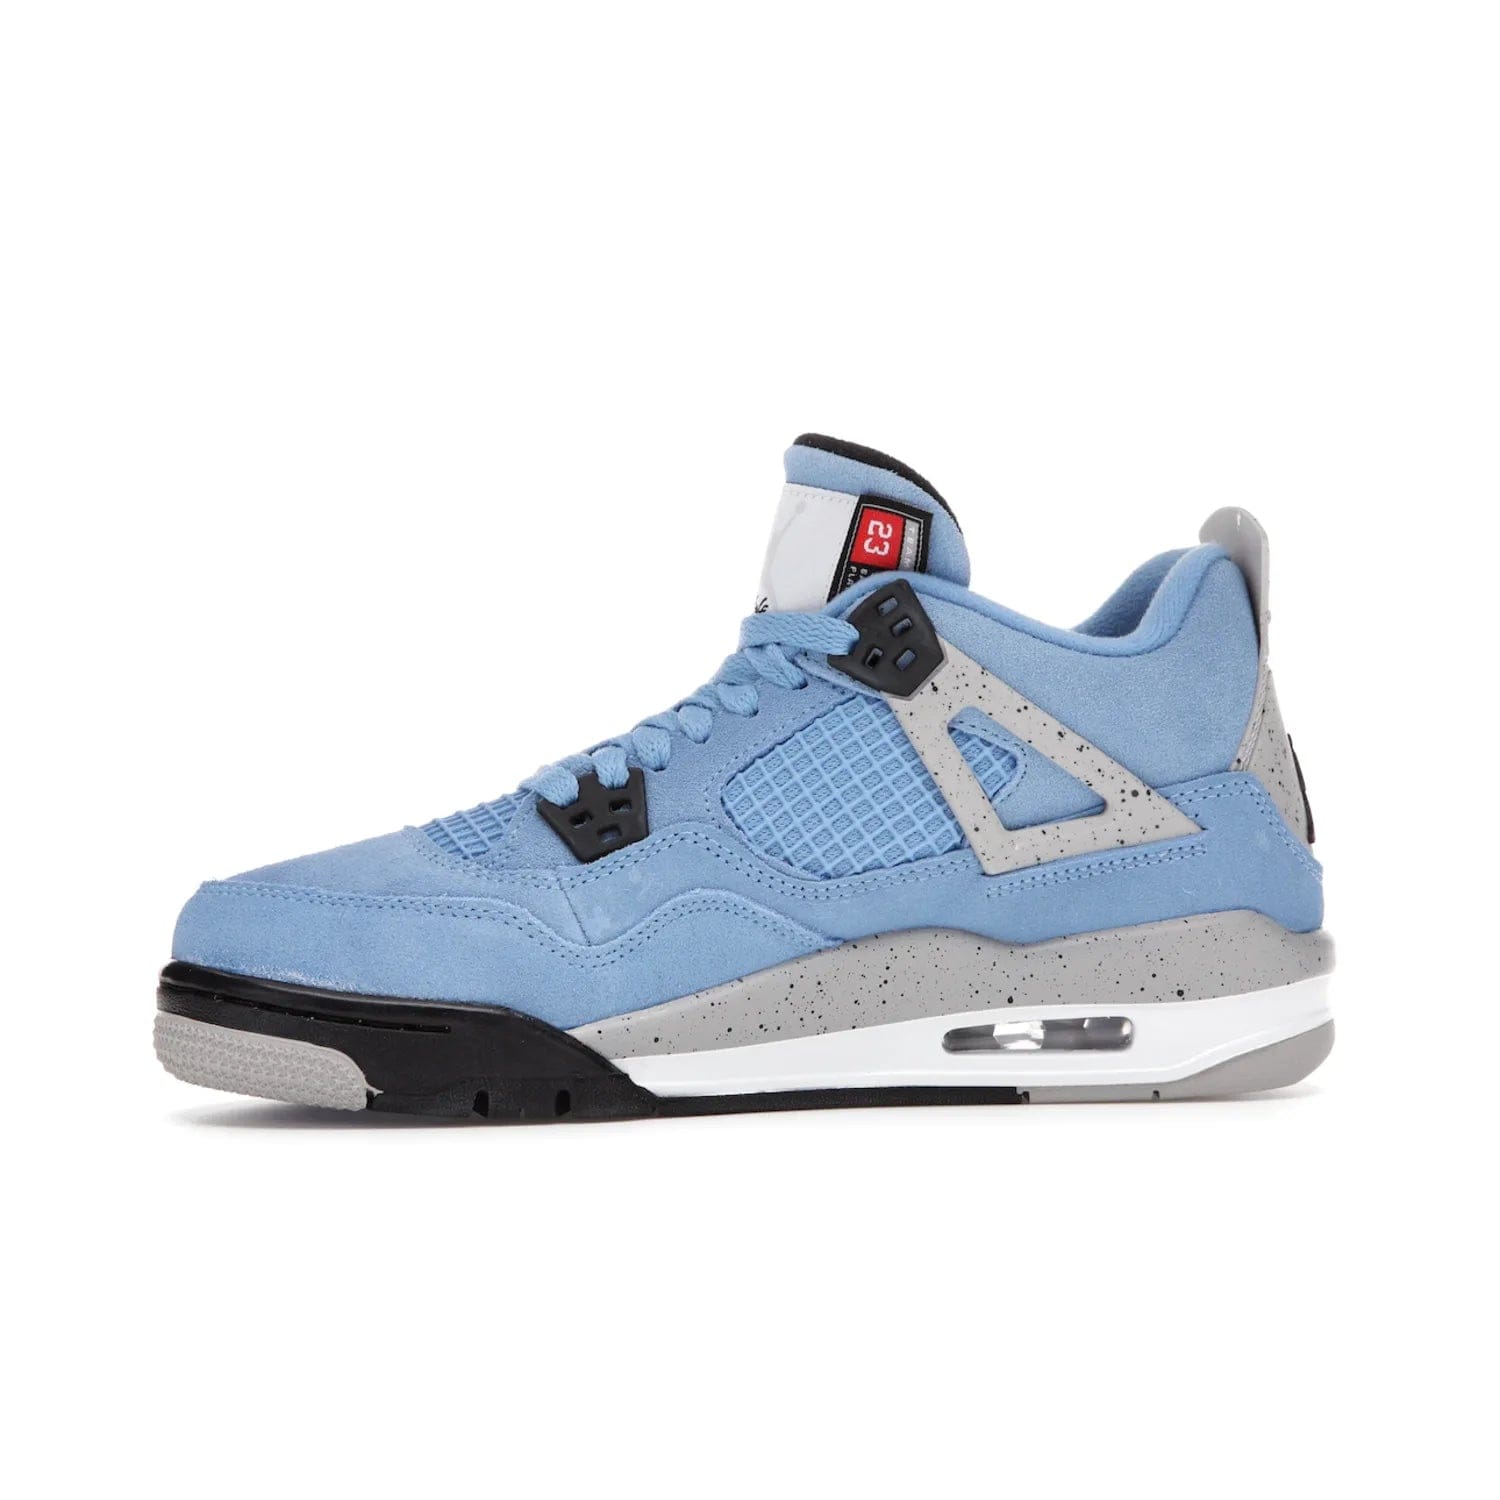 Jordan 4 Retro University Blue (GS) - Image 18 - Only at www.BallersClubKickz.com - Air Jordan 4 Retro University Blue GS: Classic silhouette and vibrant colors. Featuring a suede upper and Jumpman icon, this grade school-size shoe is perfect for collections and retails at $150.